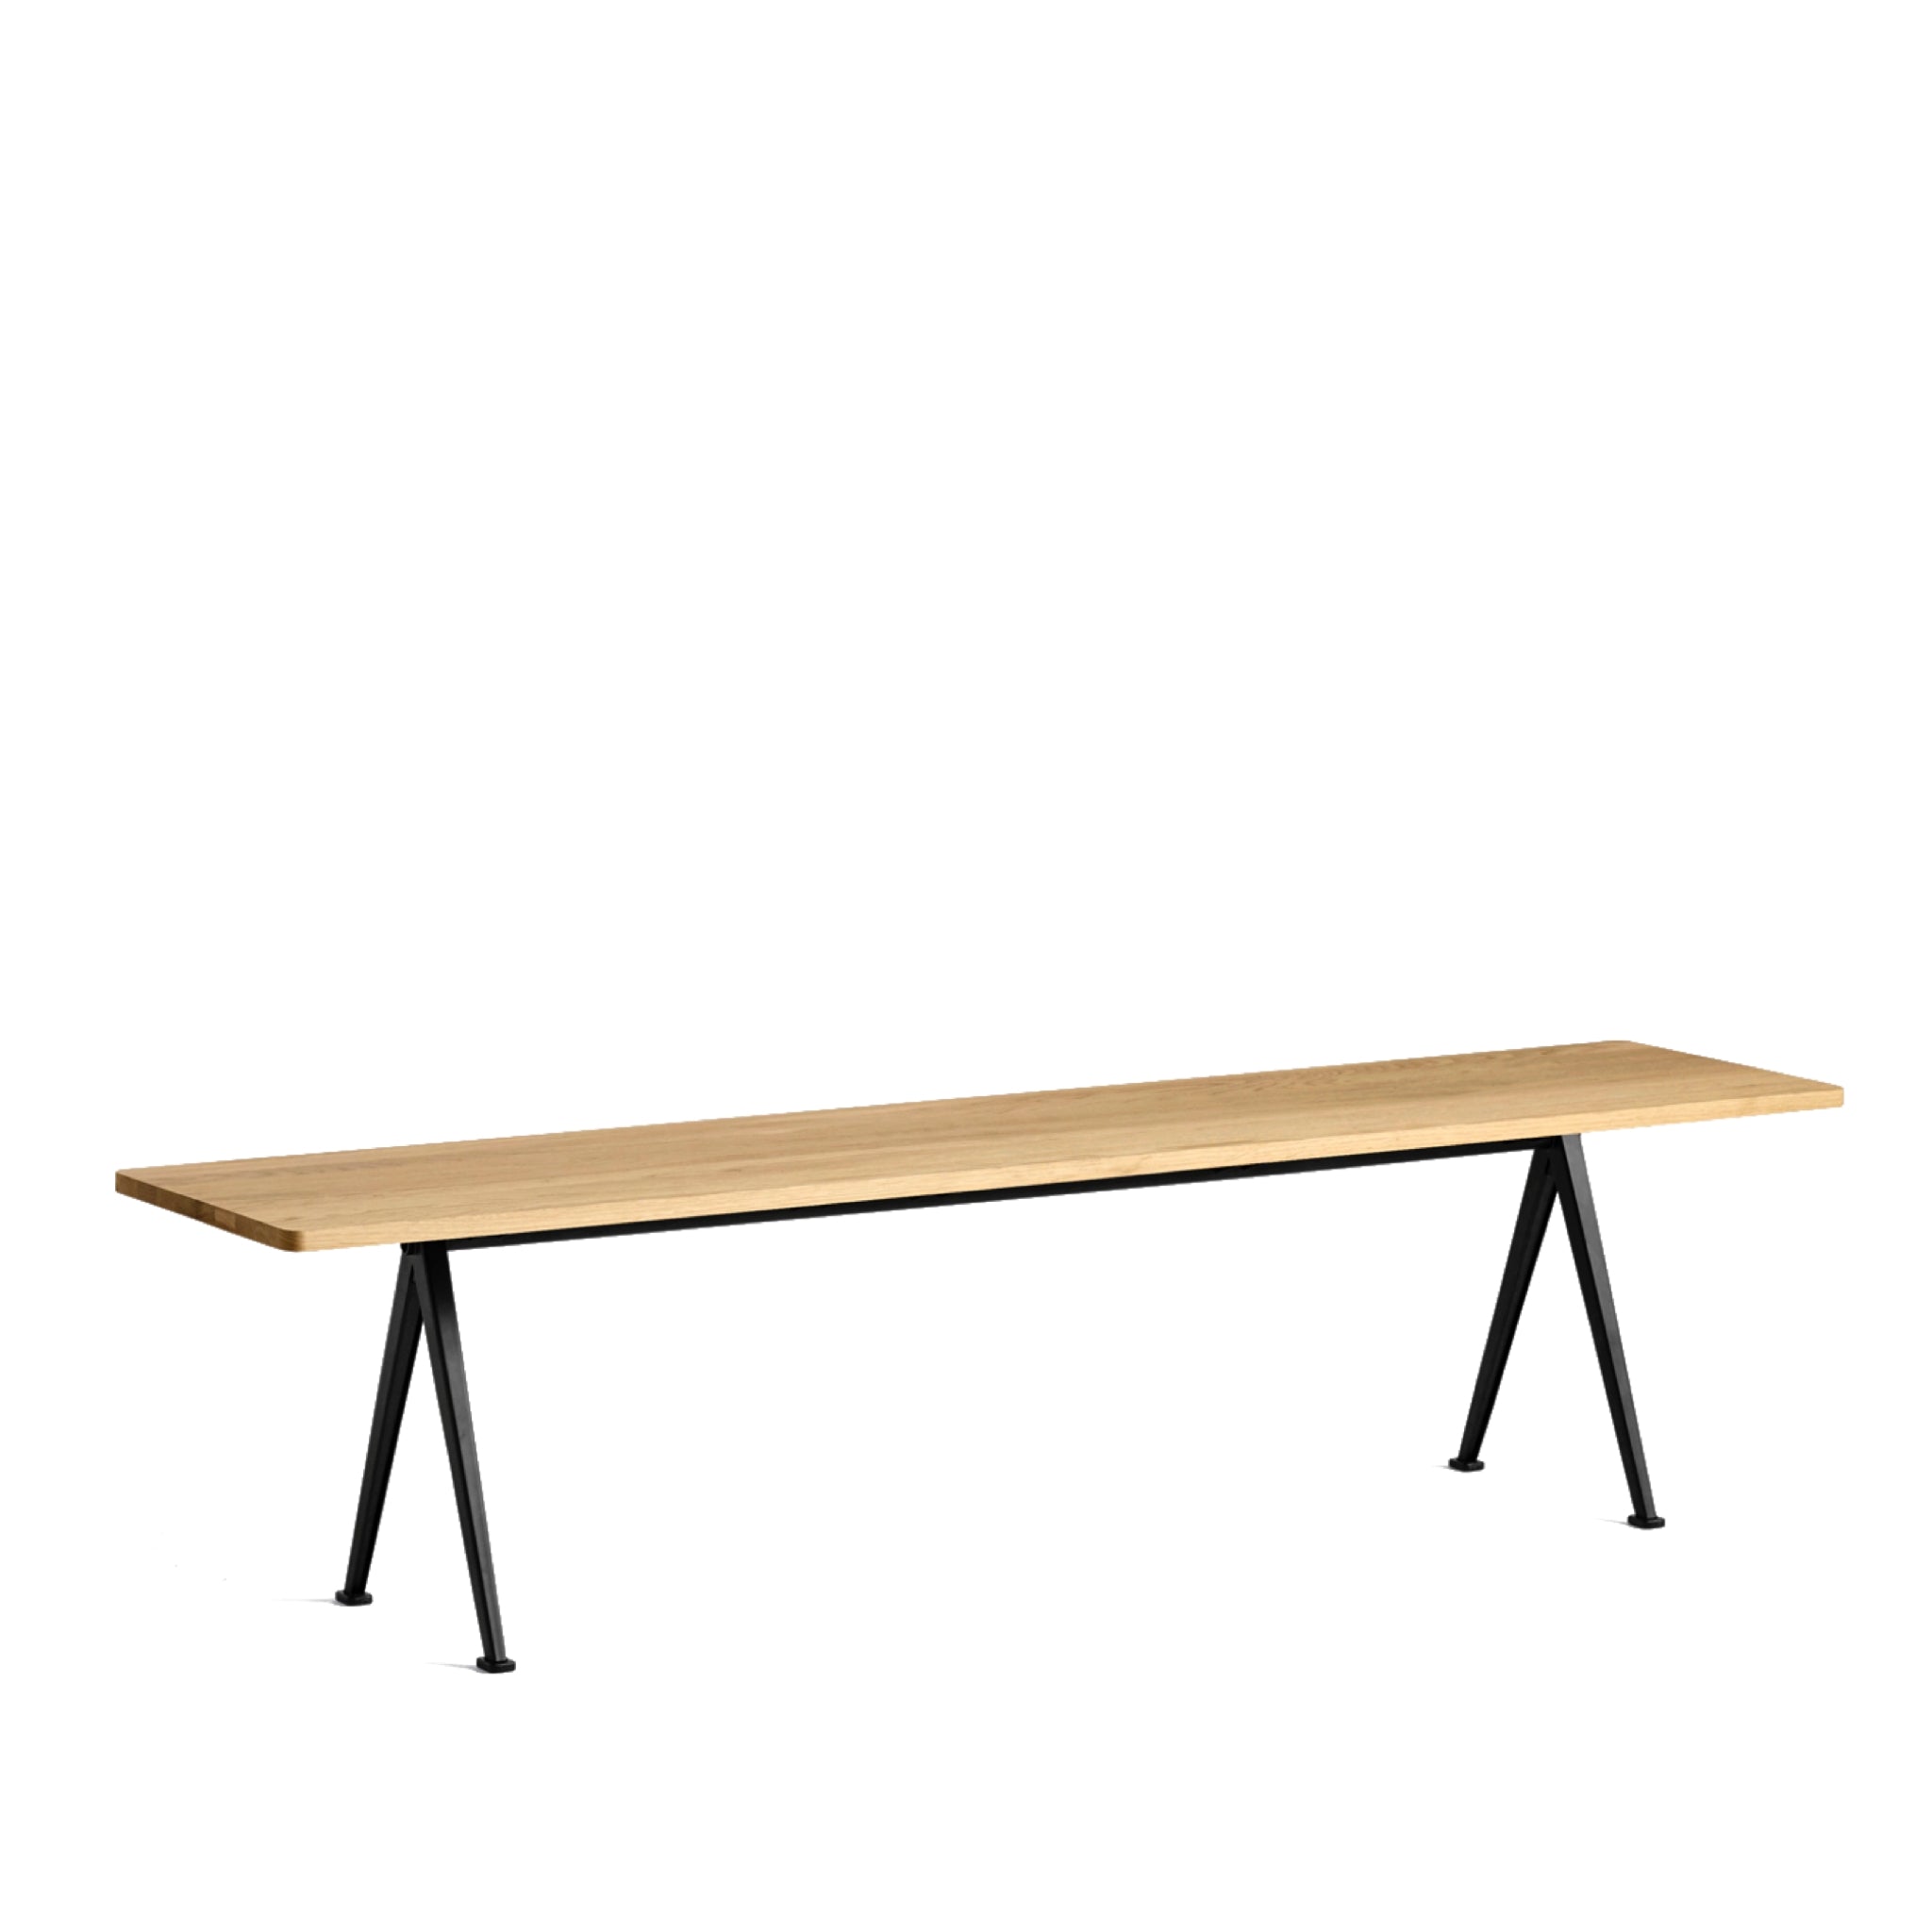 Clearance Pyramid Bench 12 / W190cm / Black / Lacquered Oak by Hay